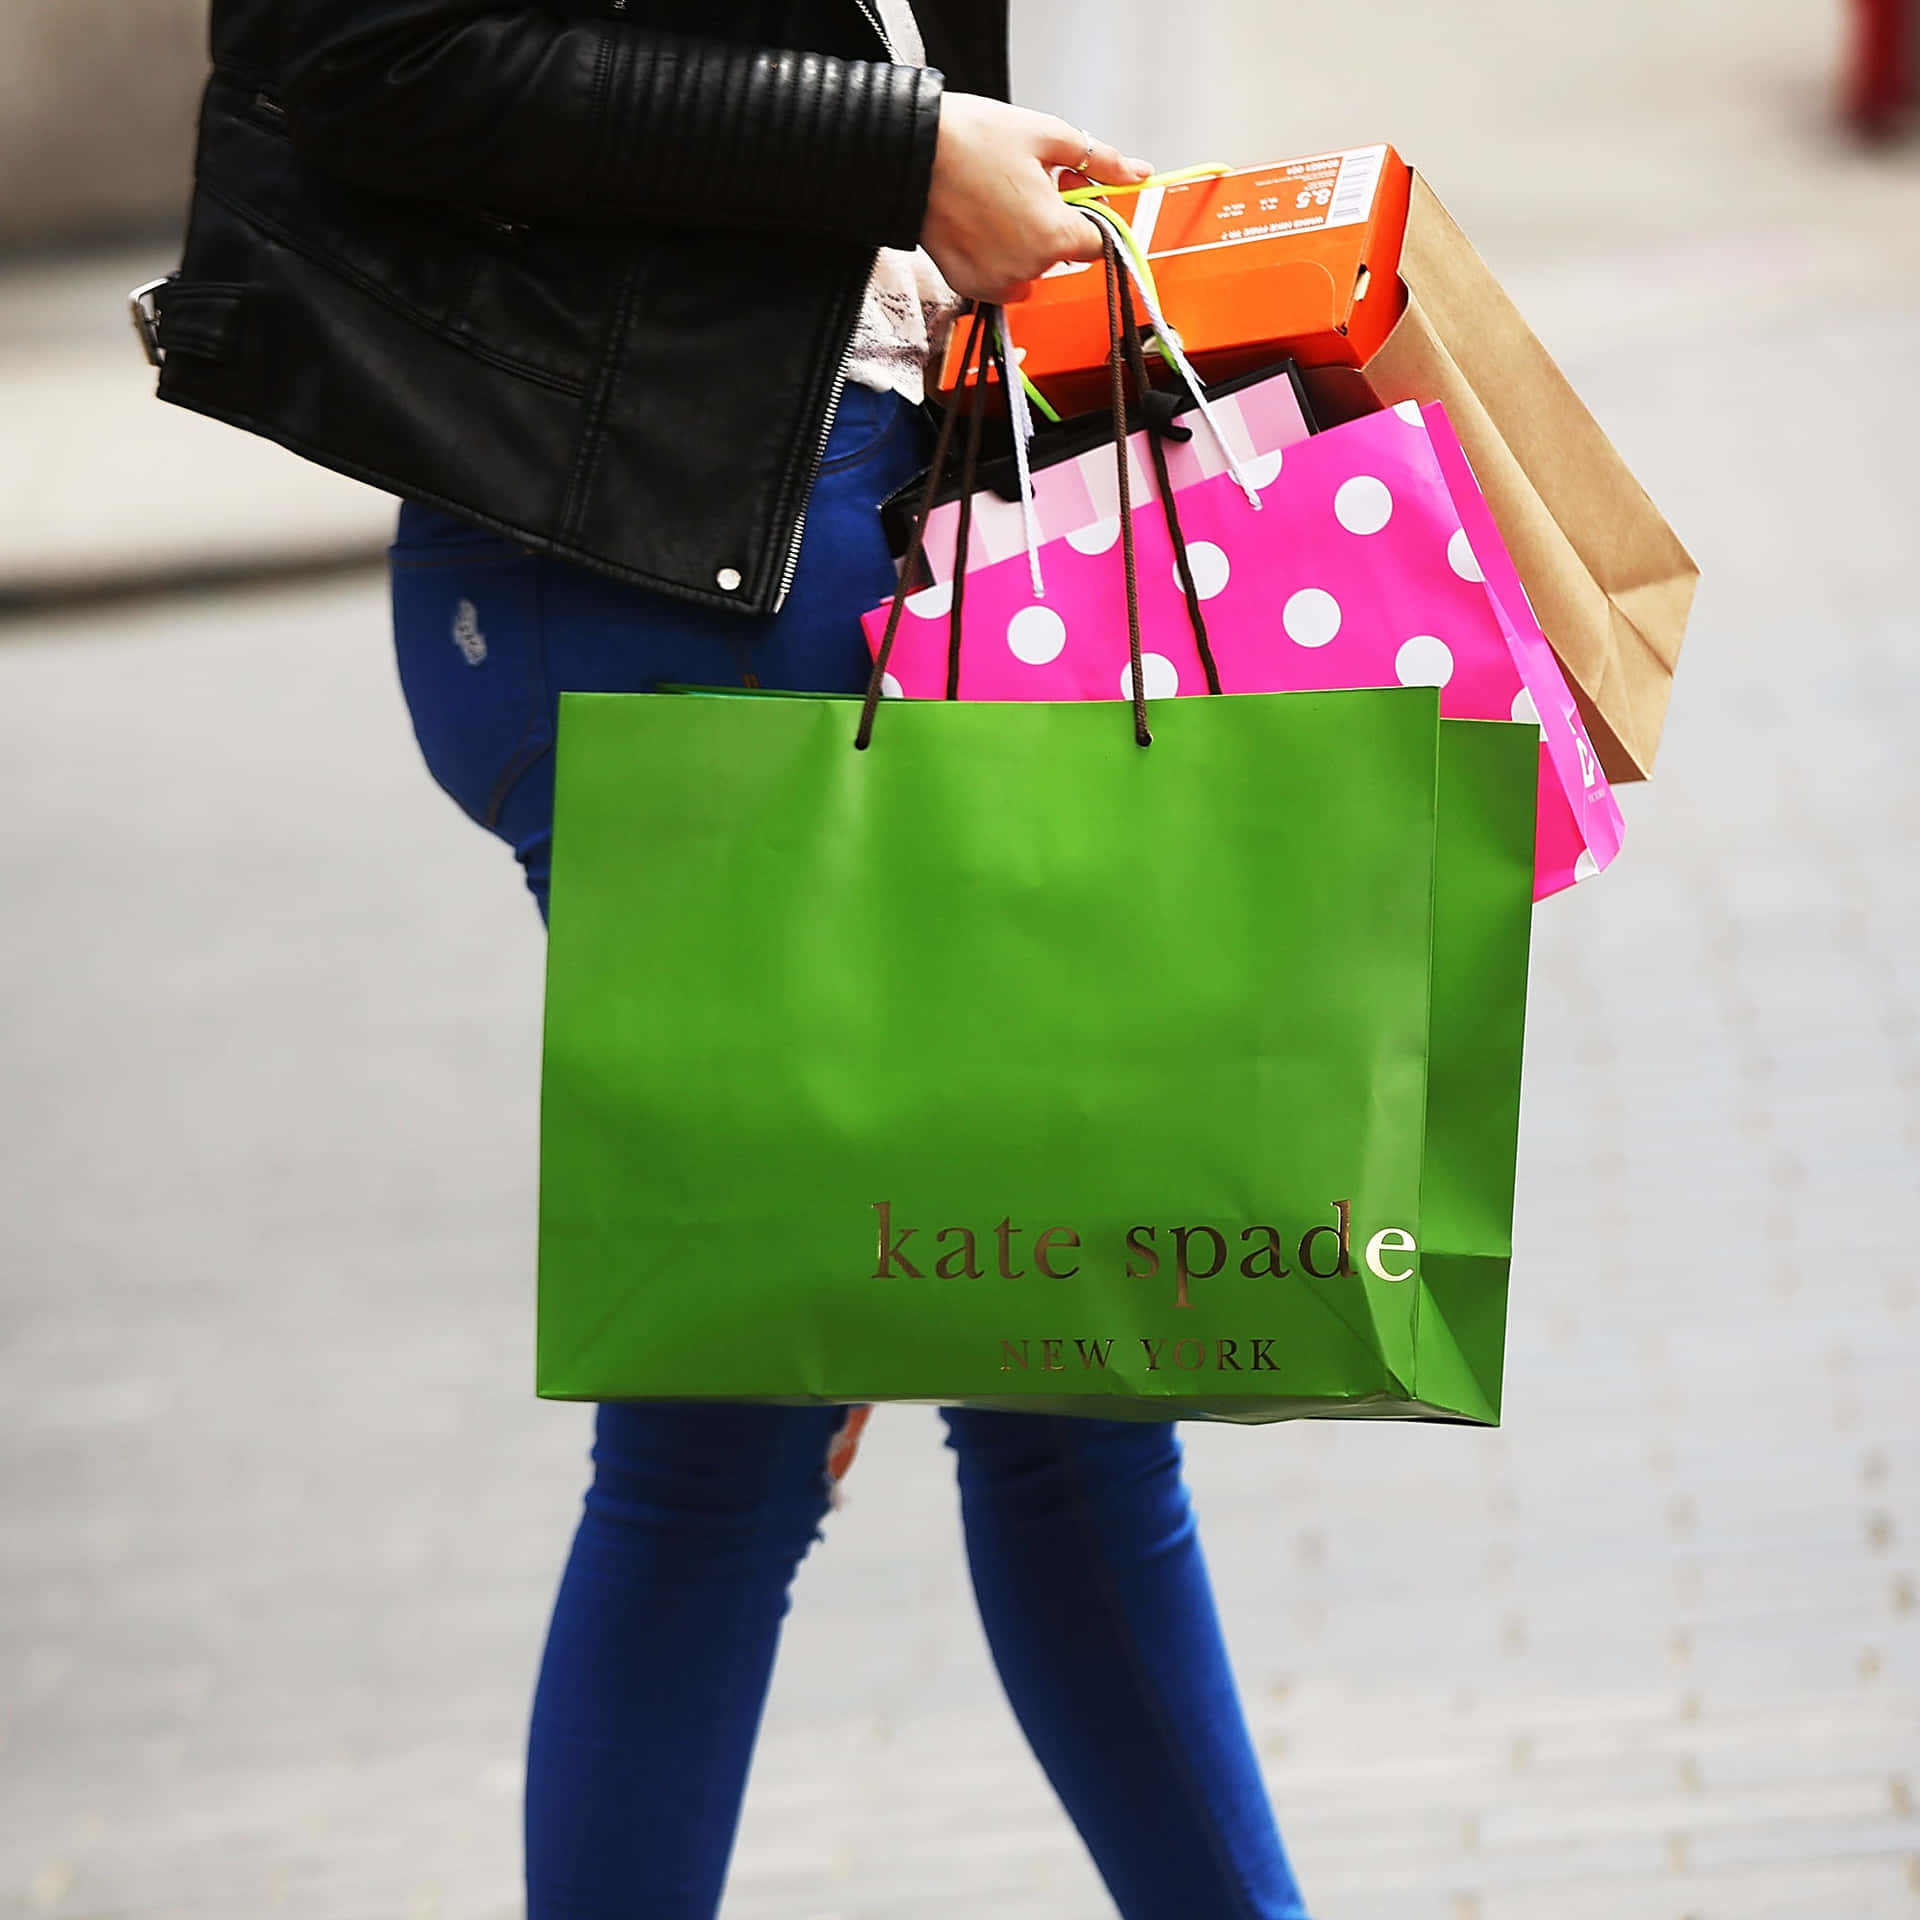 Enjoy The Sparkling Life with Kate Spade